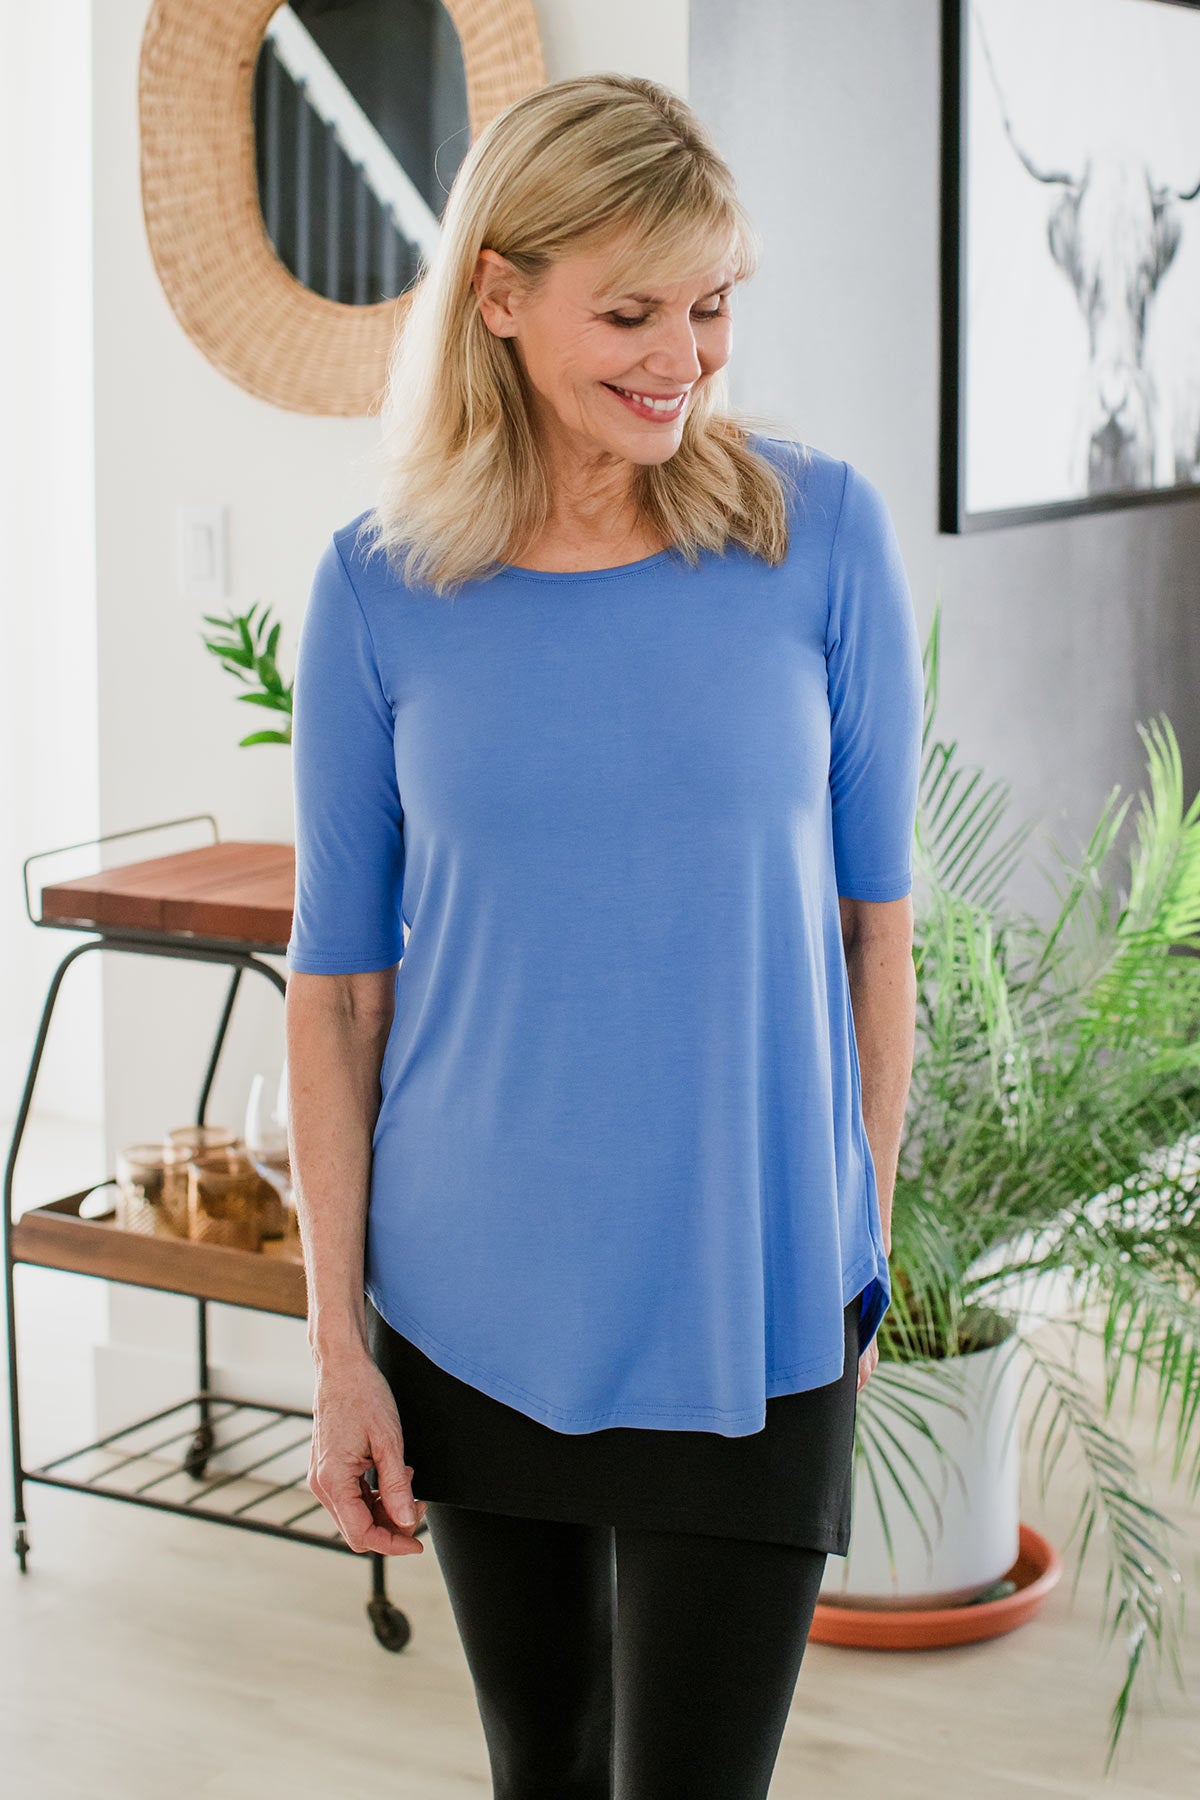 A woman with one hand in her pocket, looking down to the side and smiling, wearing Yala Sandy Relaxed Fit Scoop Neck Short Sleeve Bamboo Top in French Blue